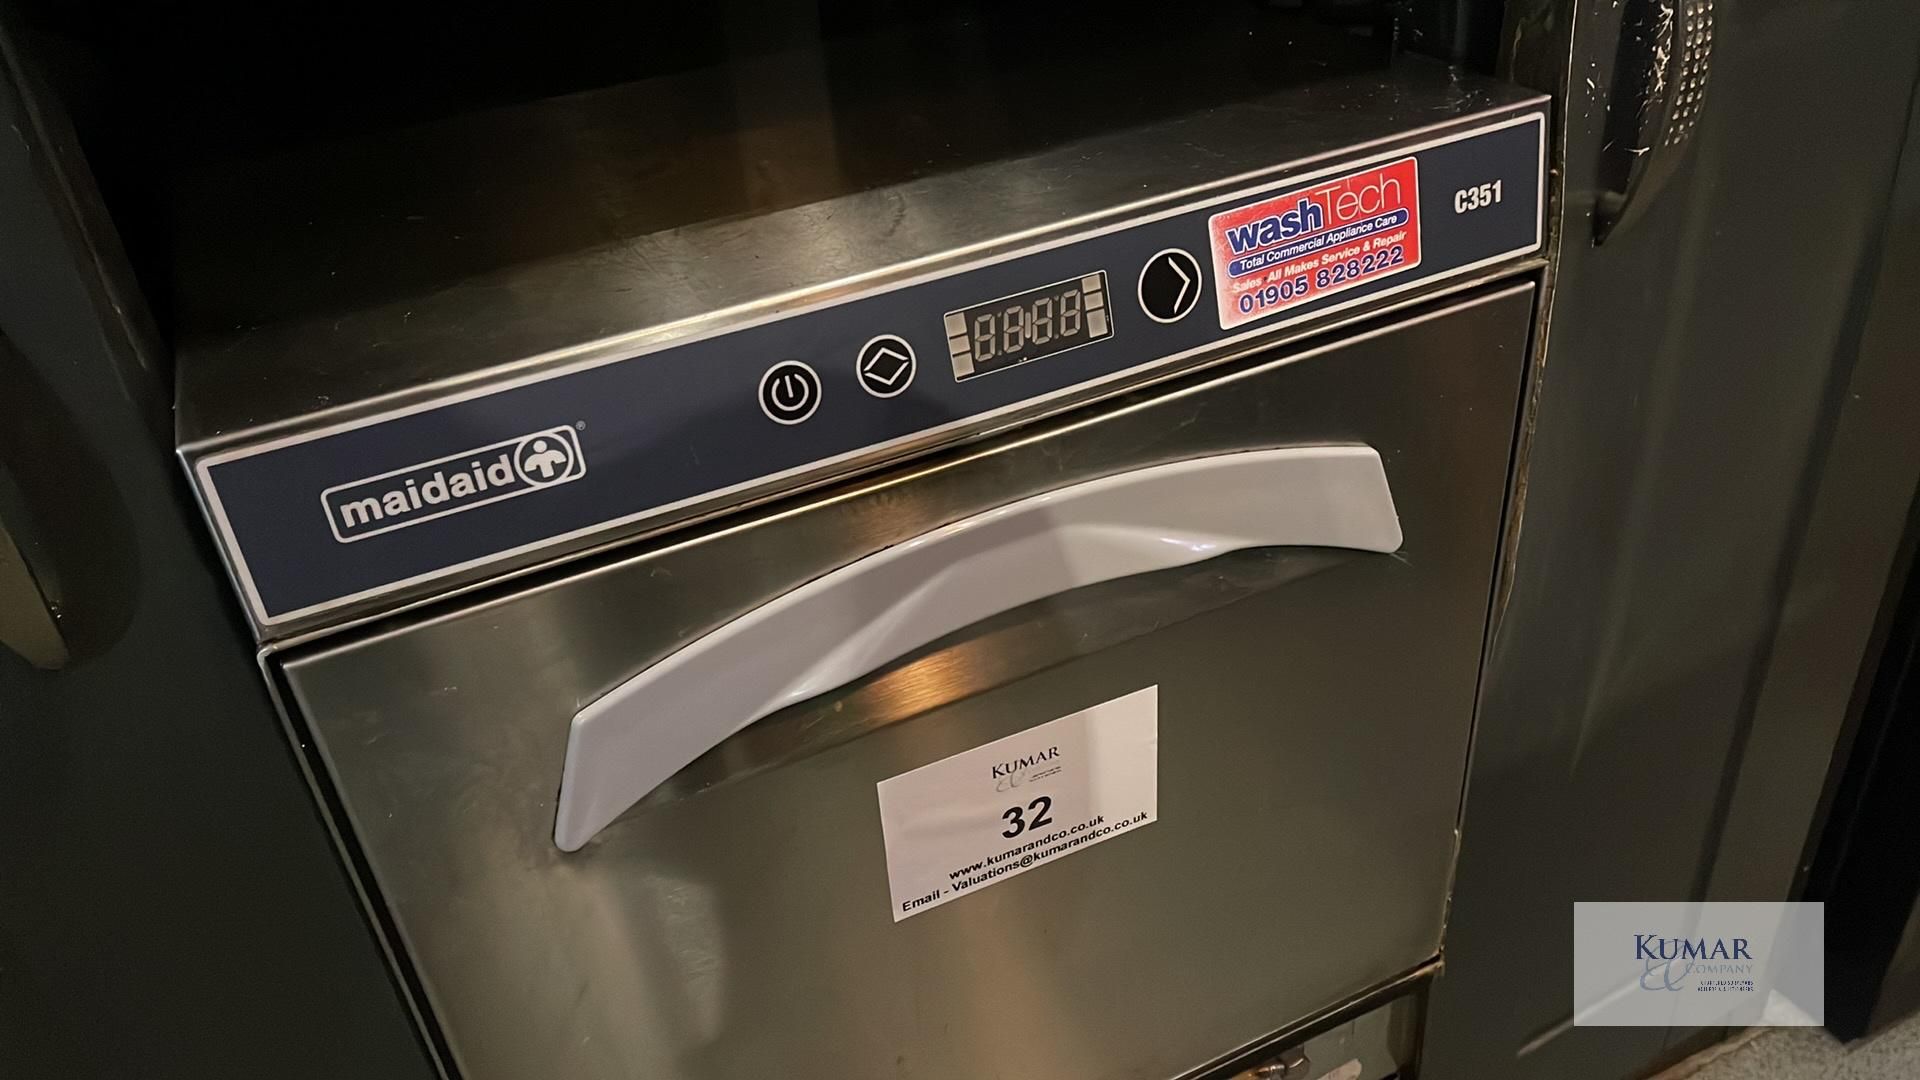 Maidaid C351 Under Counter Glasswasher, Serial No. 916478 (12/03/2018) New Cost Â£700 - Image 7 of 8